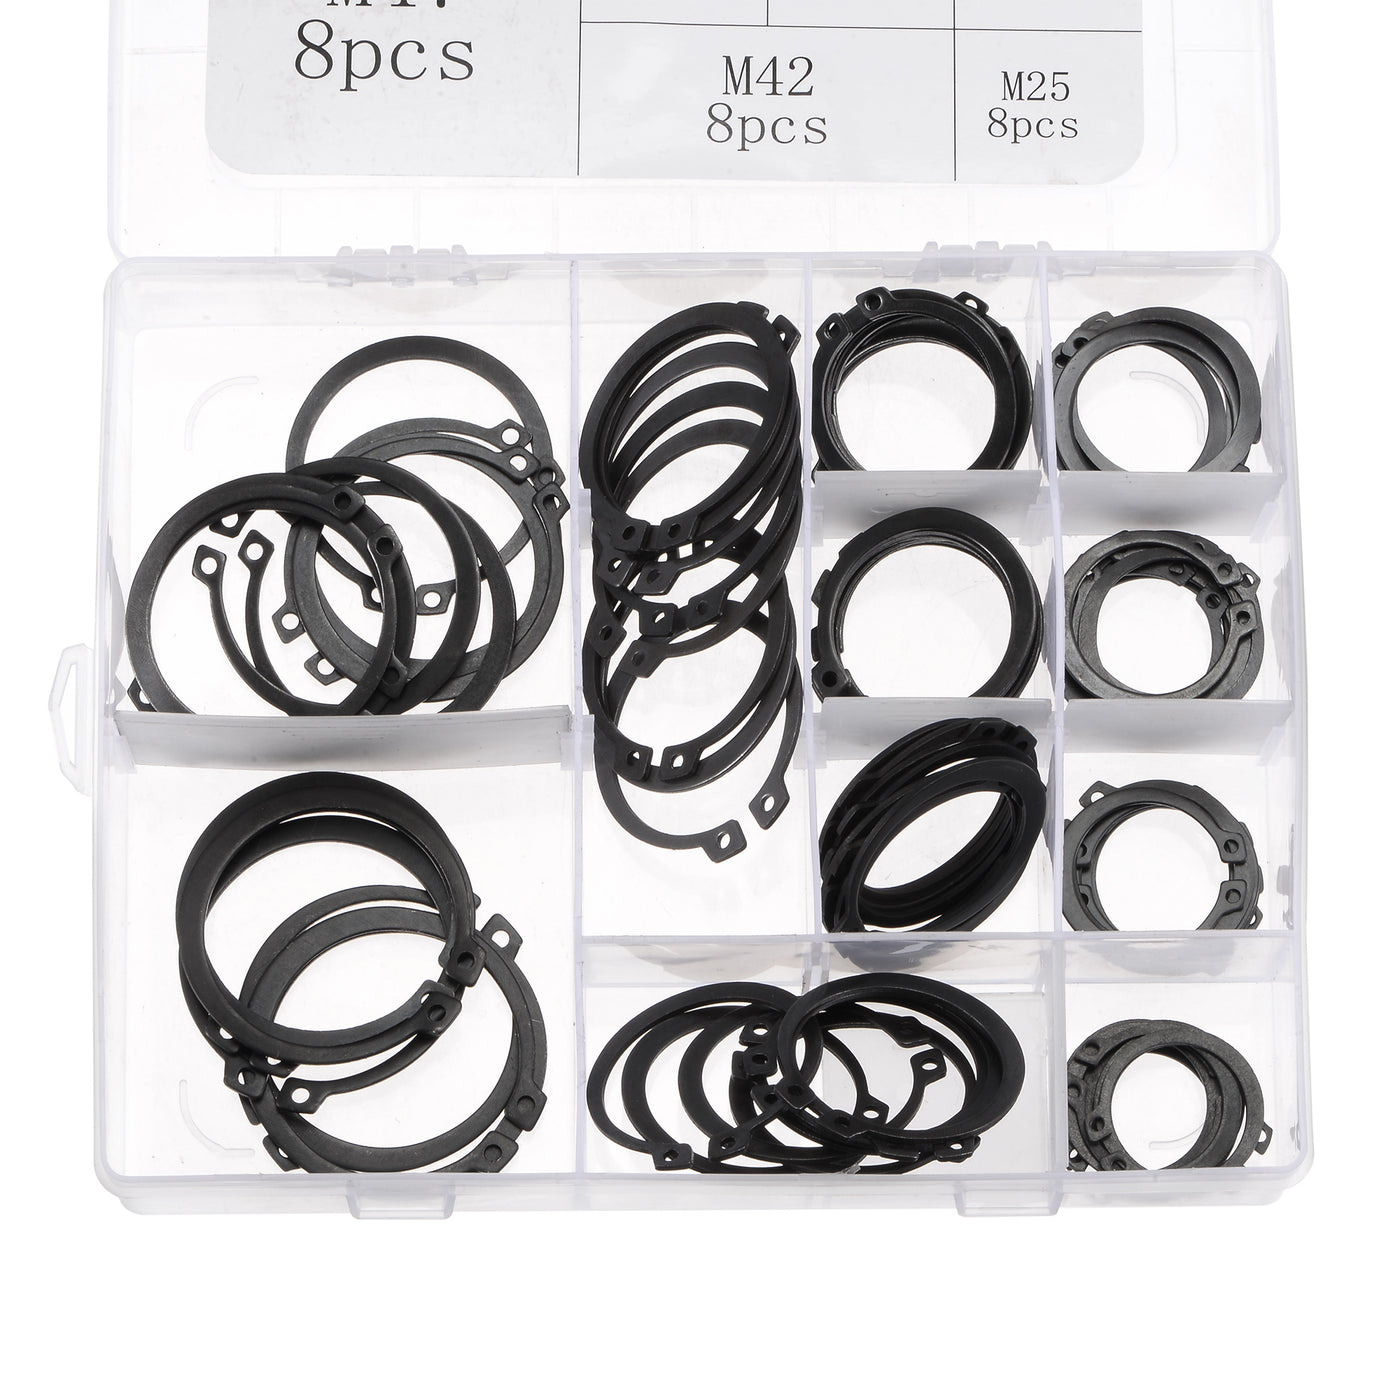 uxcell Uxcell E-Clip Circlip - 88Pcs 11-Size External Retaining Shaft Snap Ring Washer Carbon Steel Assortment Set Black - Size: 25mm to 47mm